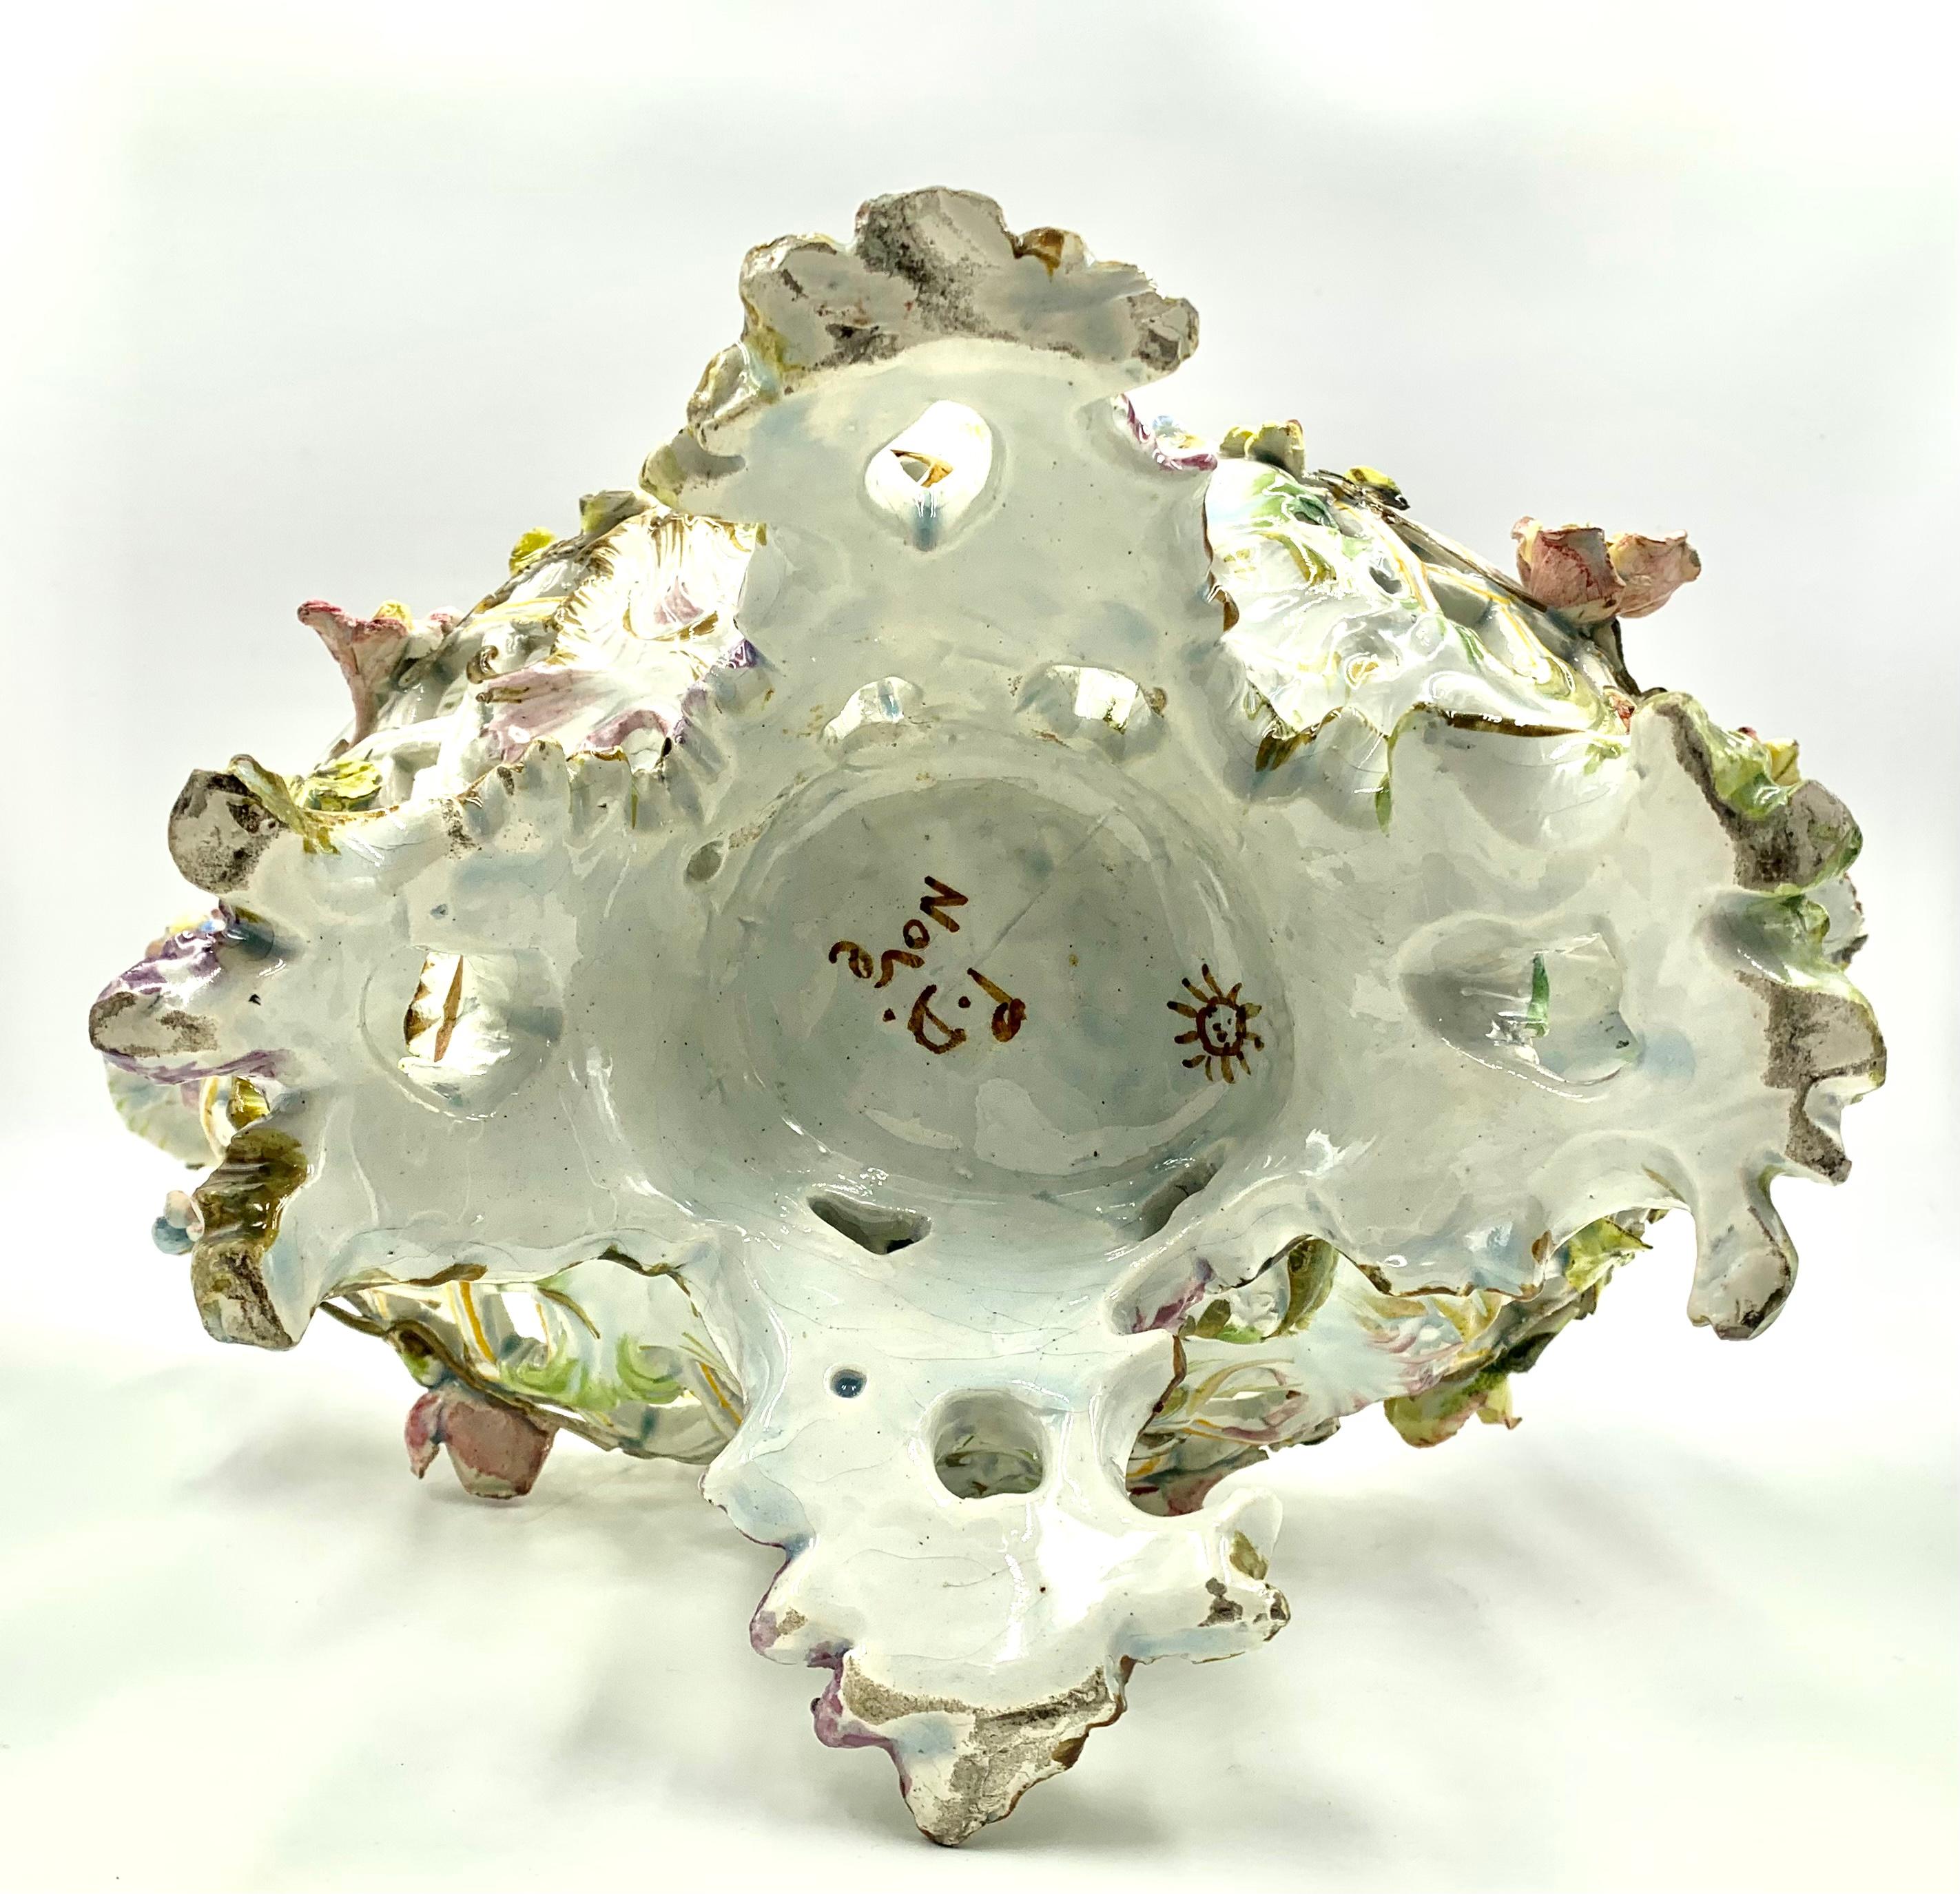 Rare Reticulated Antique Italian Nove Faience Rococo Flower Garland Centerpiece For Sale 4